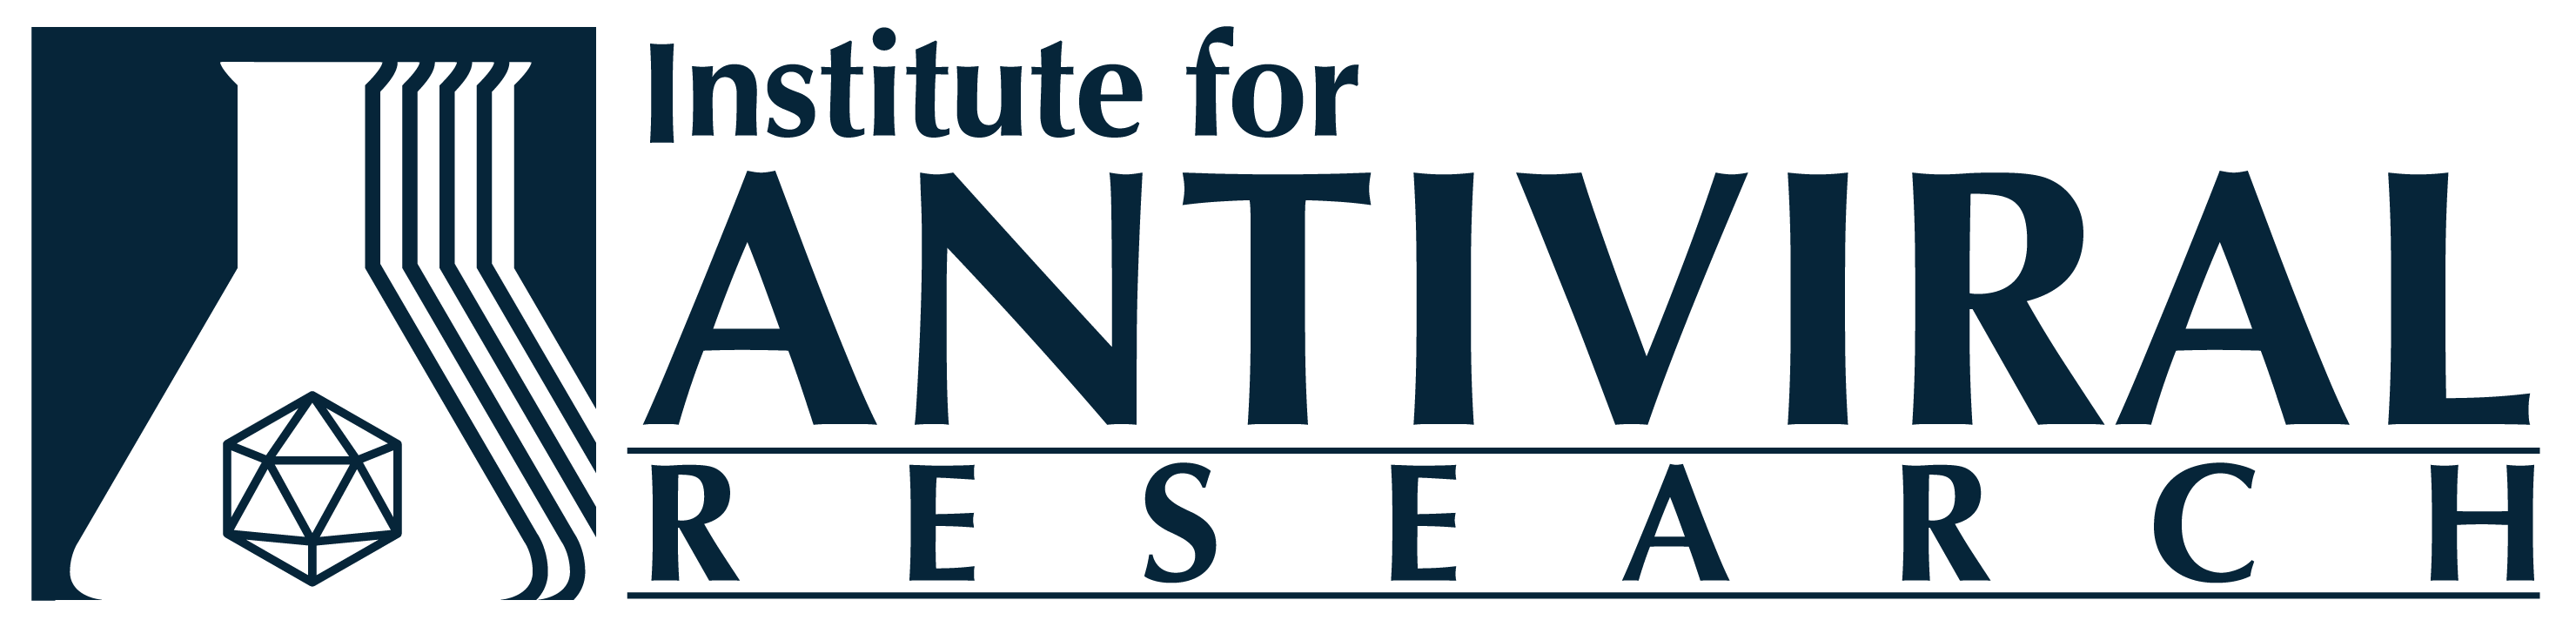 Institute for Antiviral Research logo